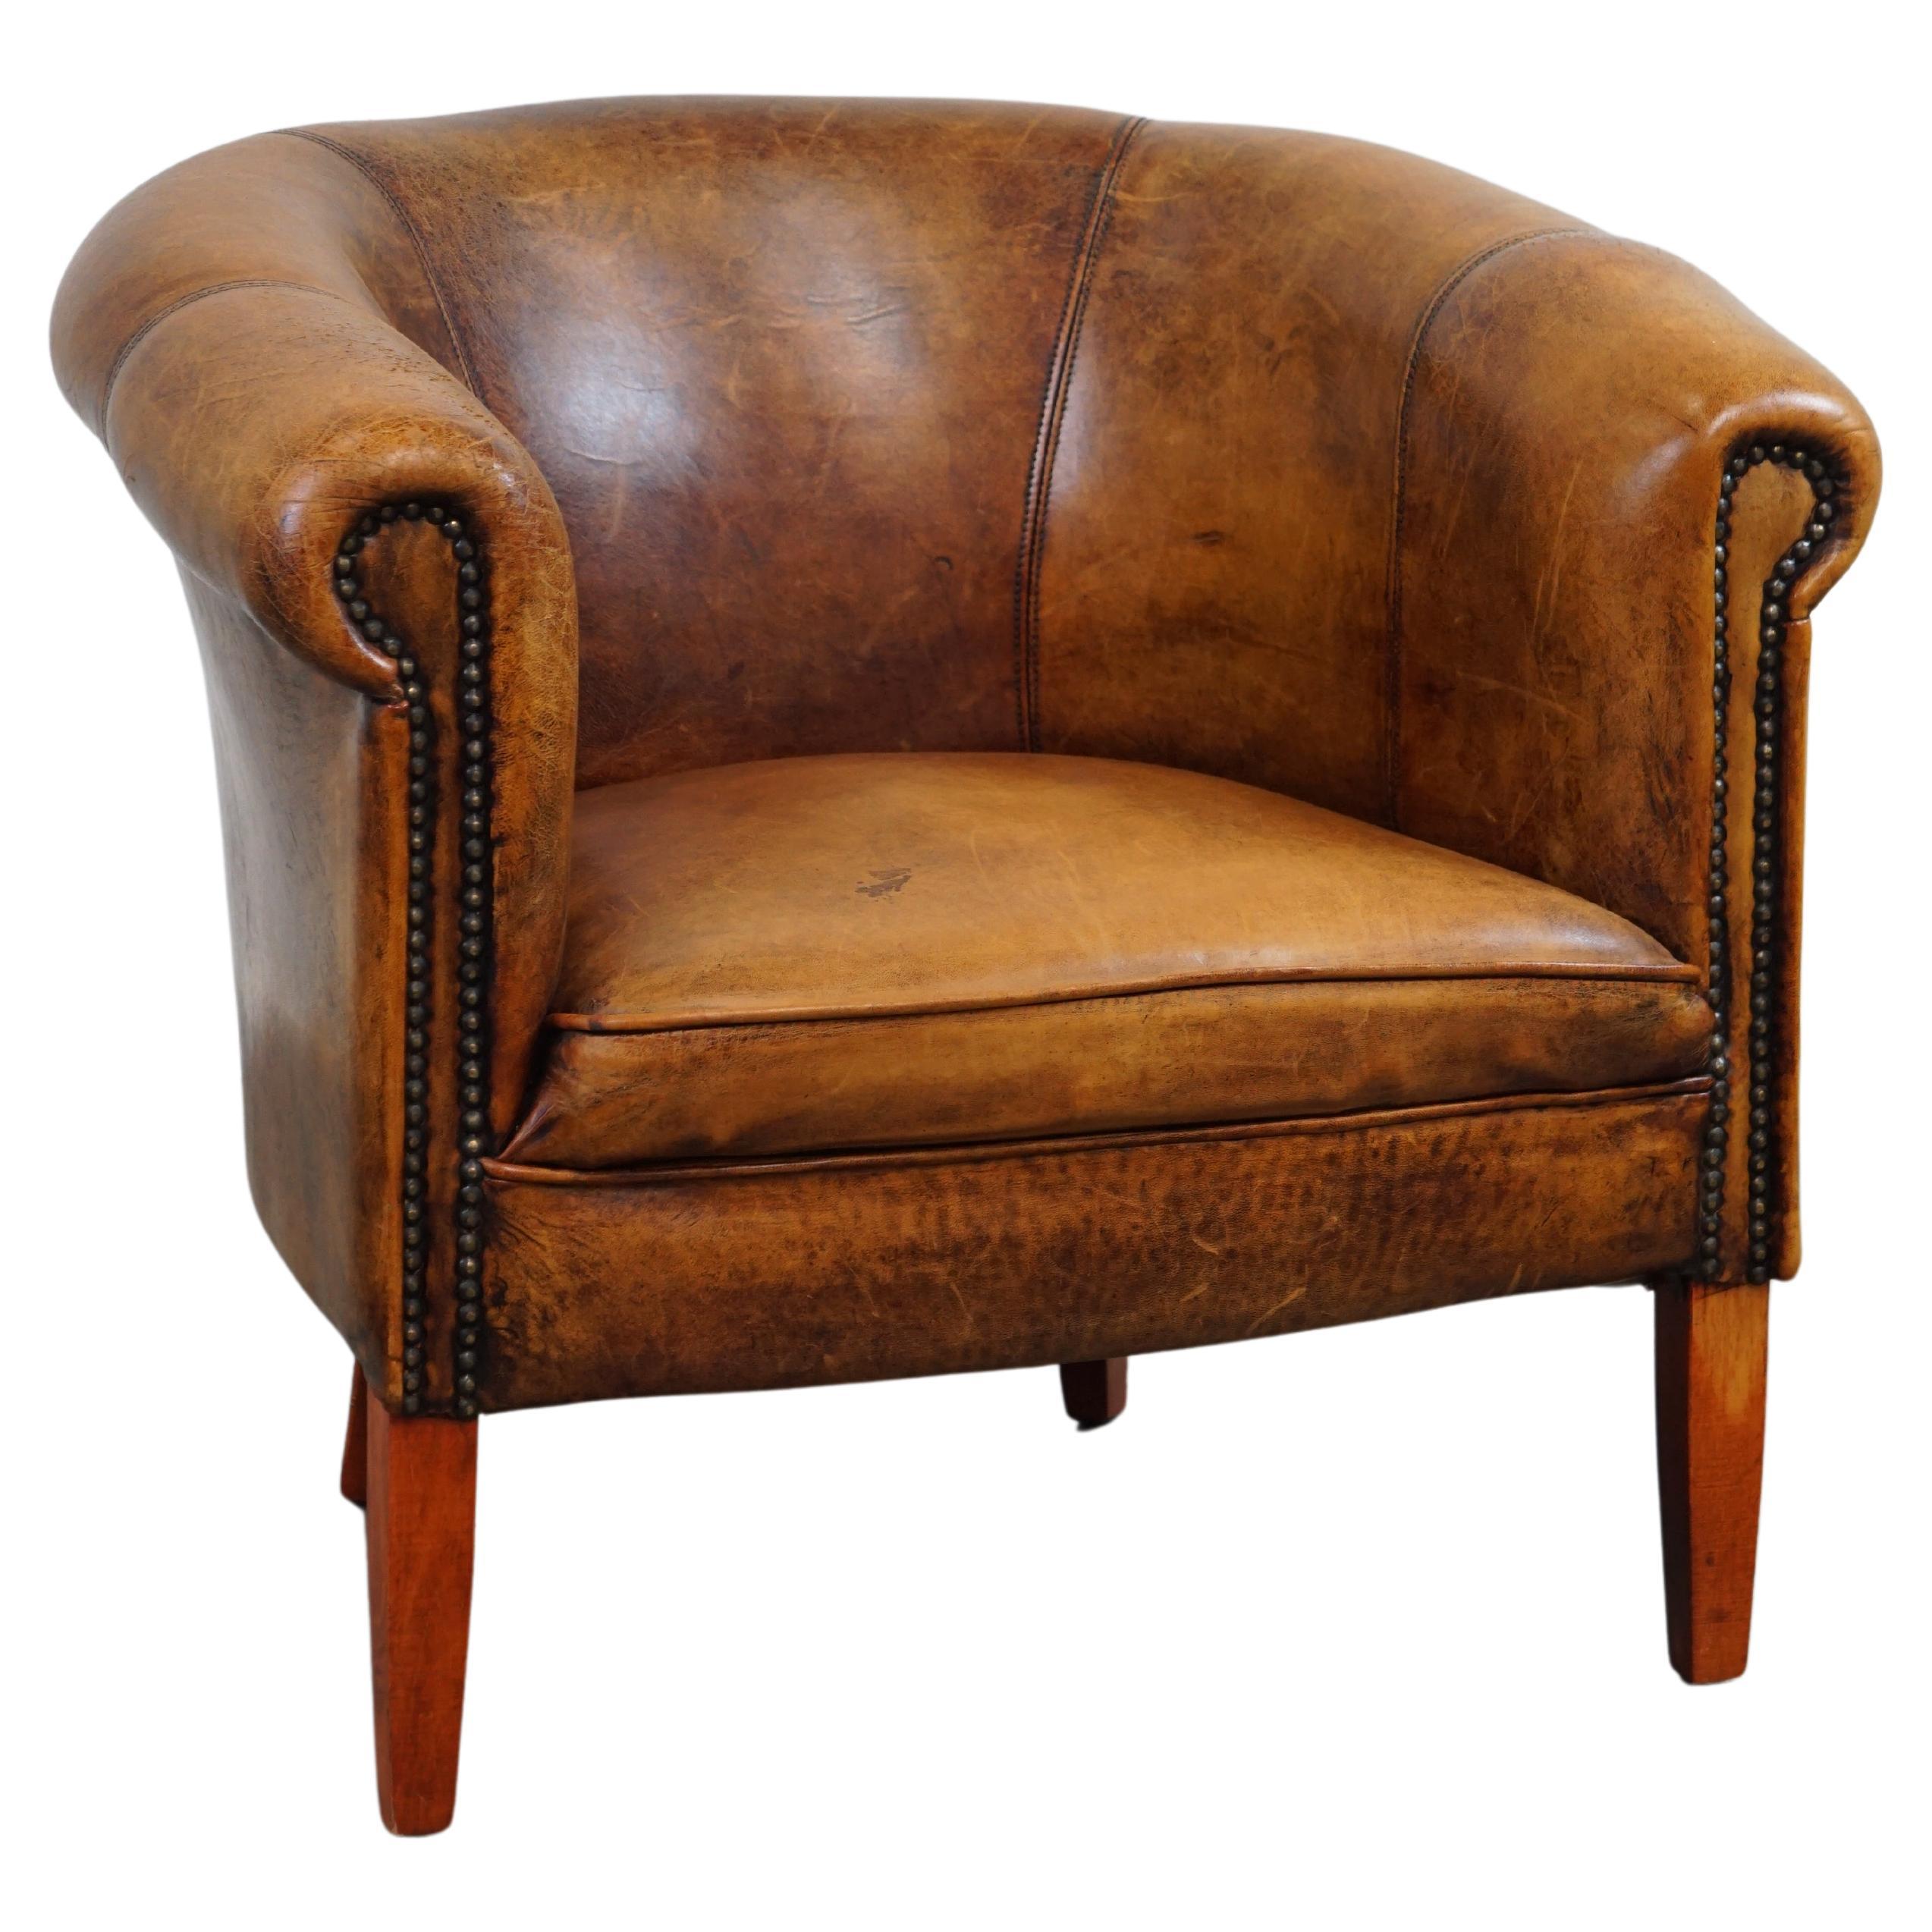 Very charming subtle sheep leather club armchair with beautiful colors and decor